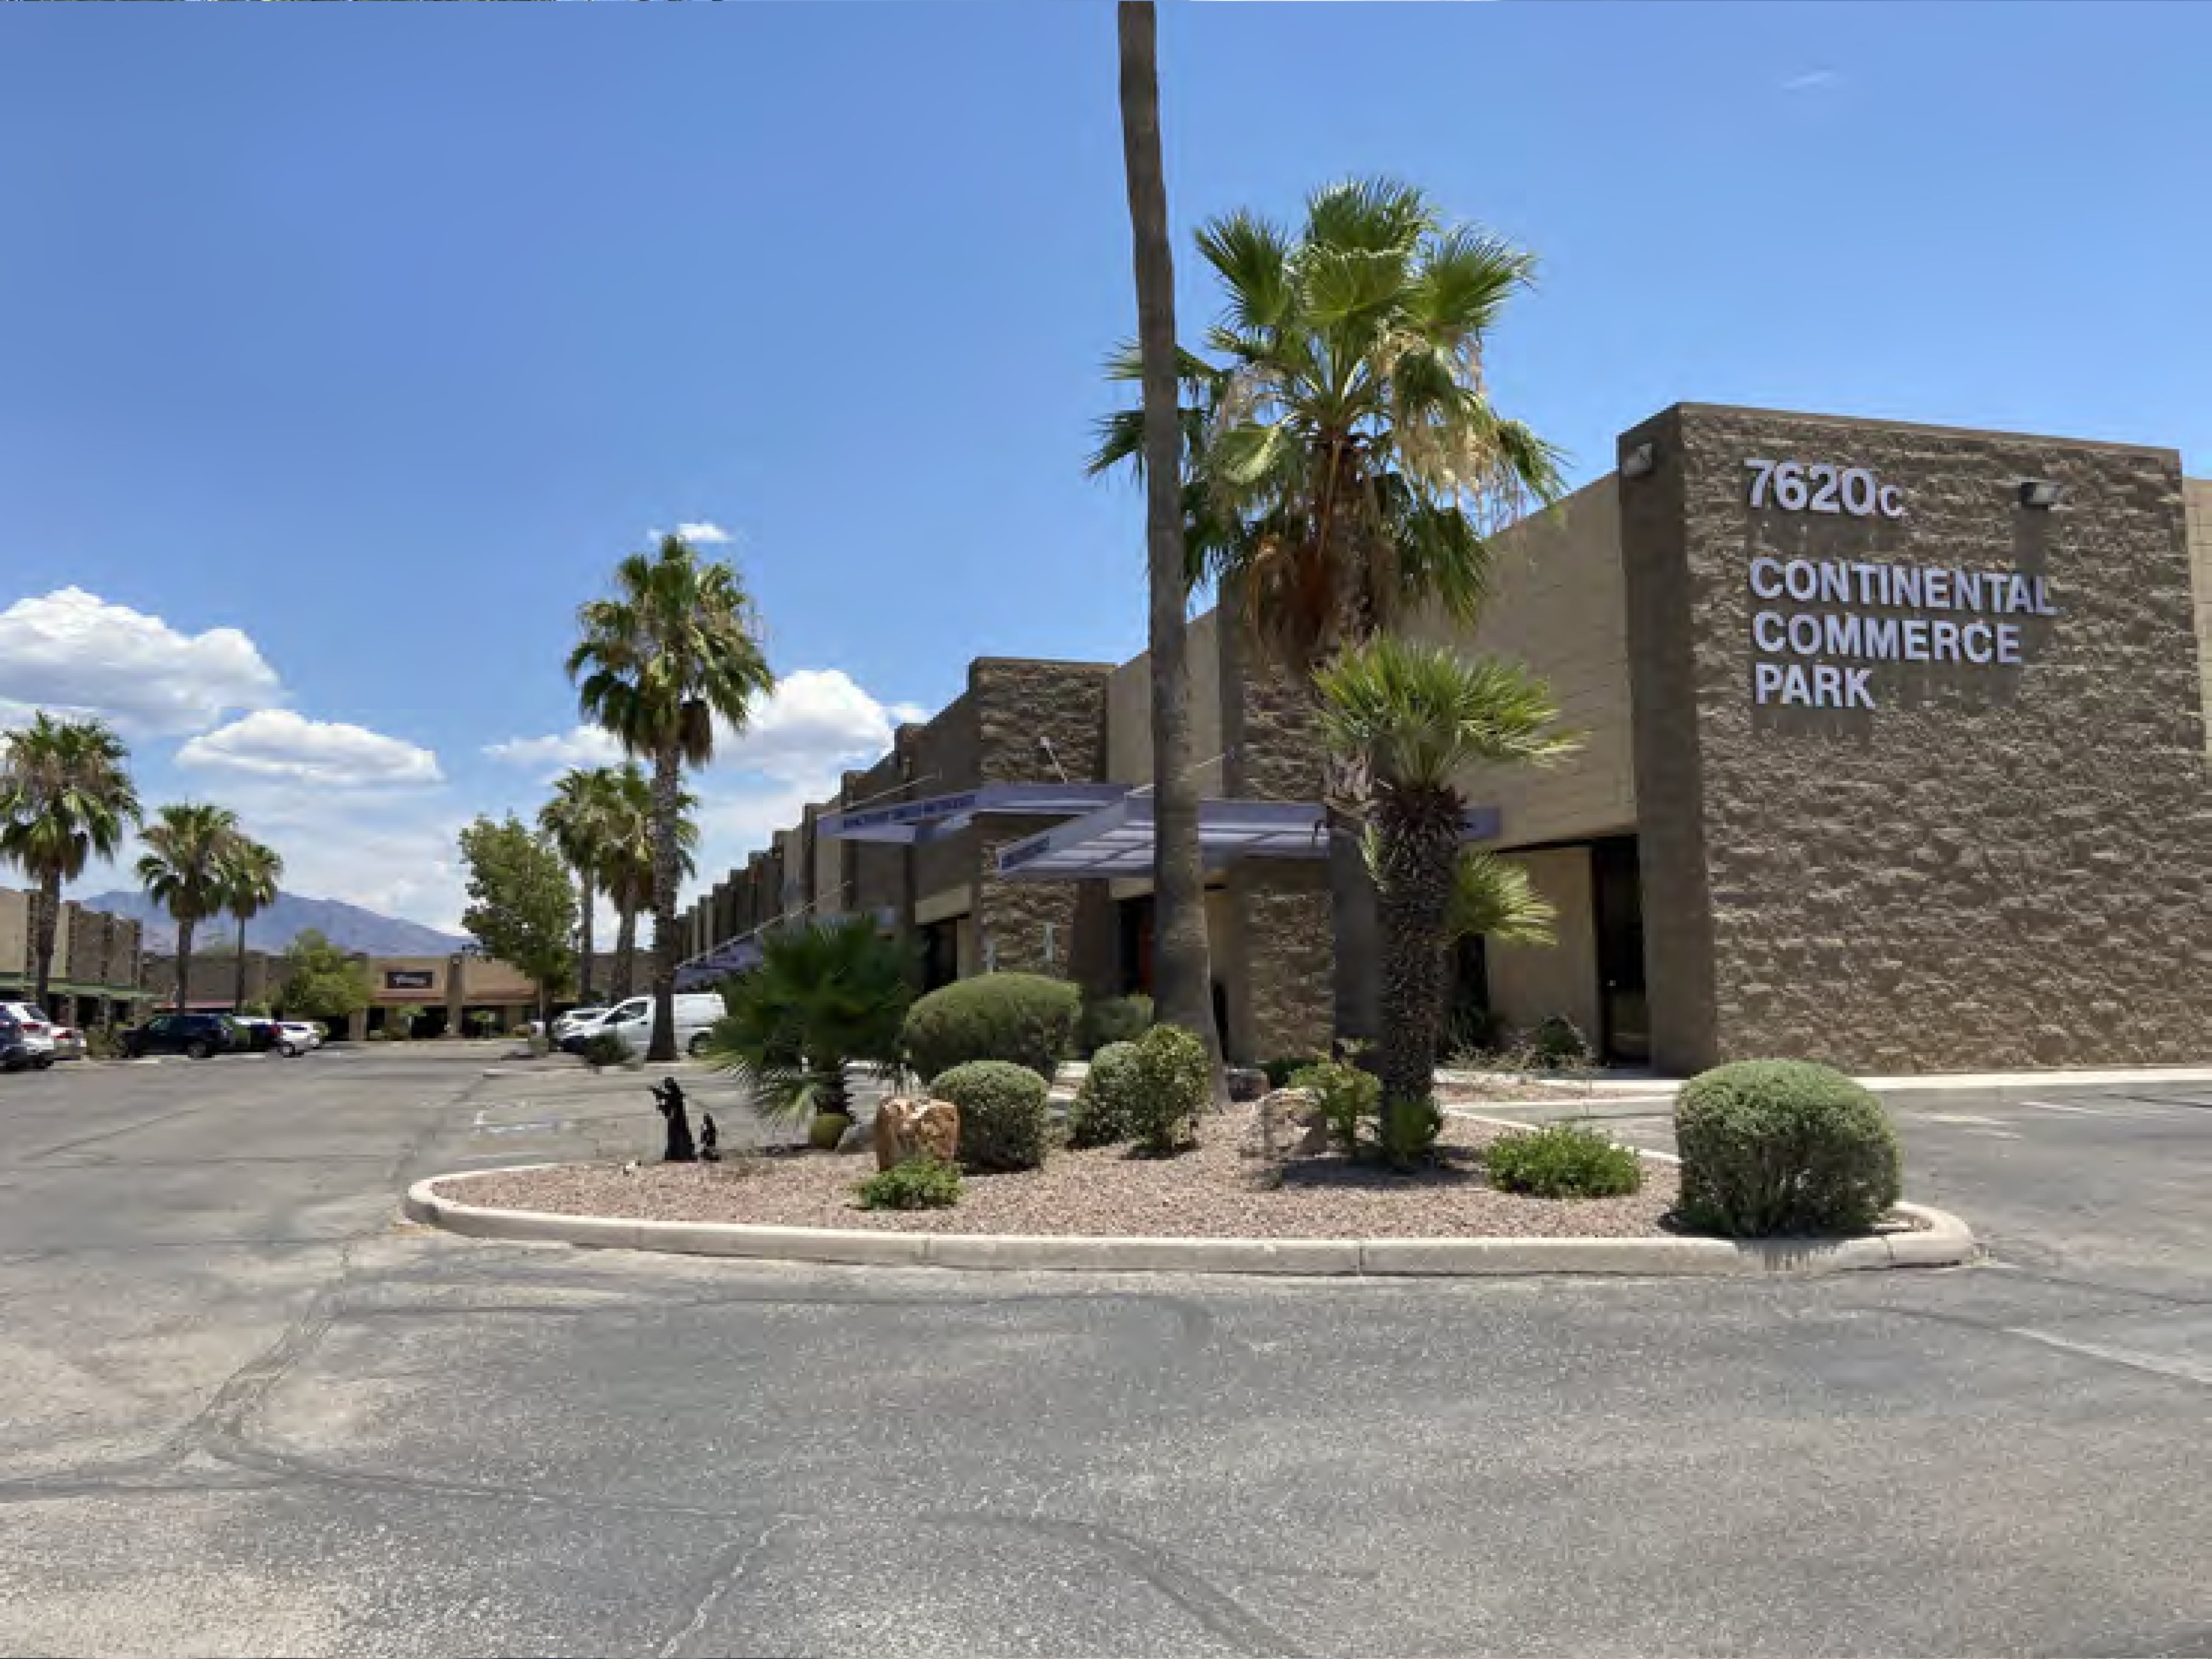 7620 N Hartman Lane - Building From Street - CRE Tucson Commercial Property Listing